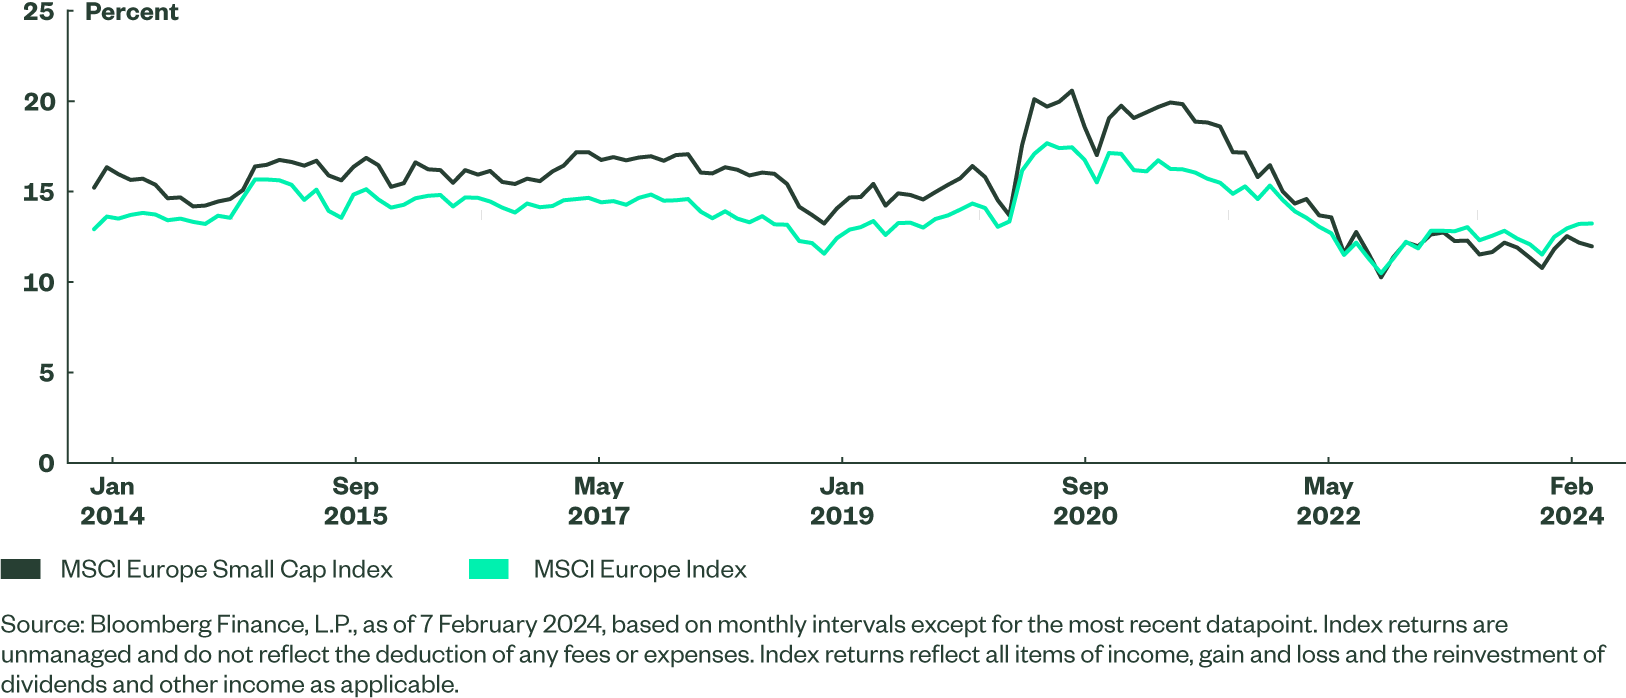 A line chart showing the 1-year forward P/E ratio for both the MSCI Europe Index and MSCI Europe Small Cap Index.